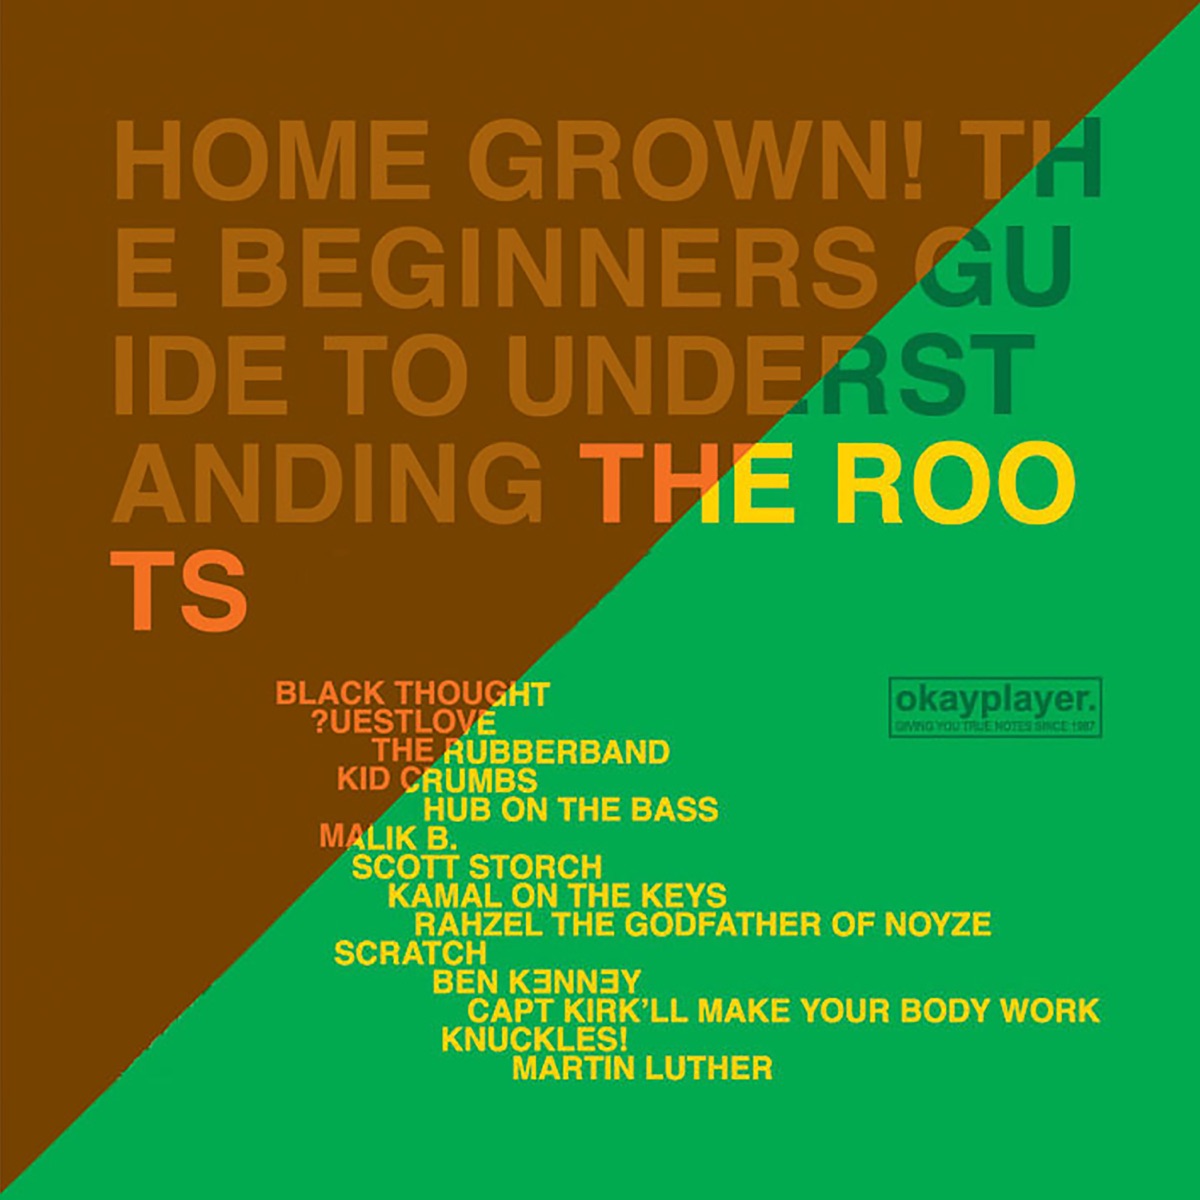 Home Grown! The Beginner's Guide to Understanding the Roots, Vols